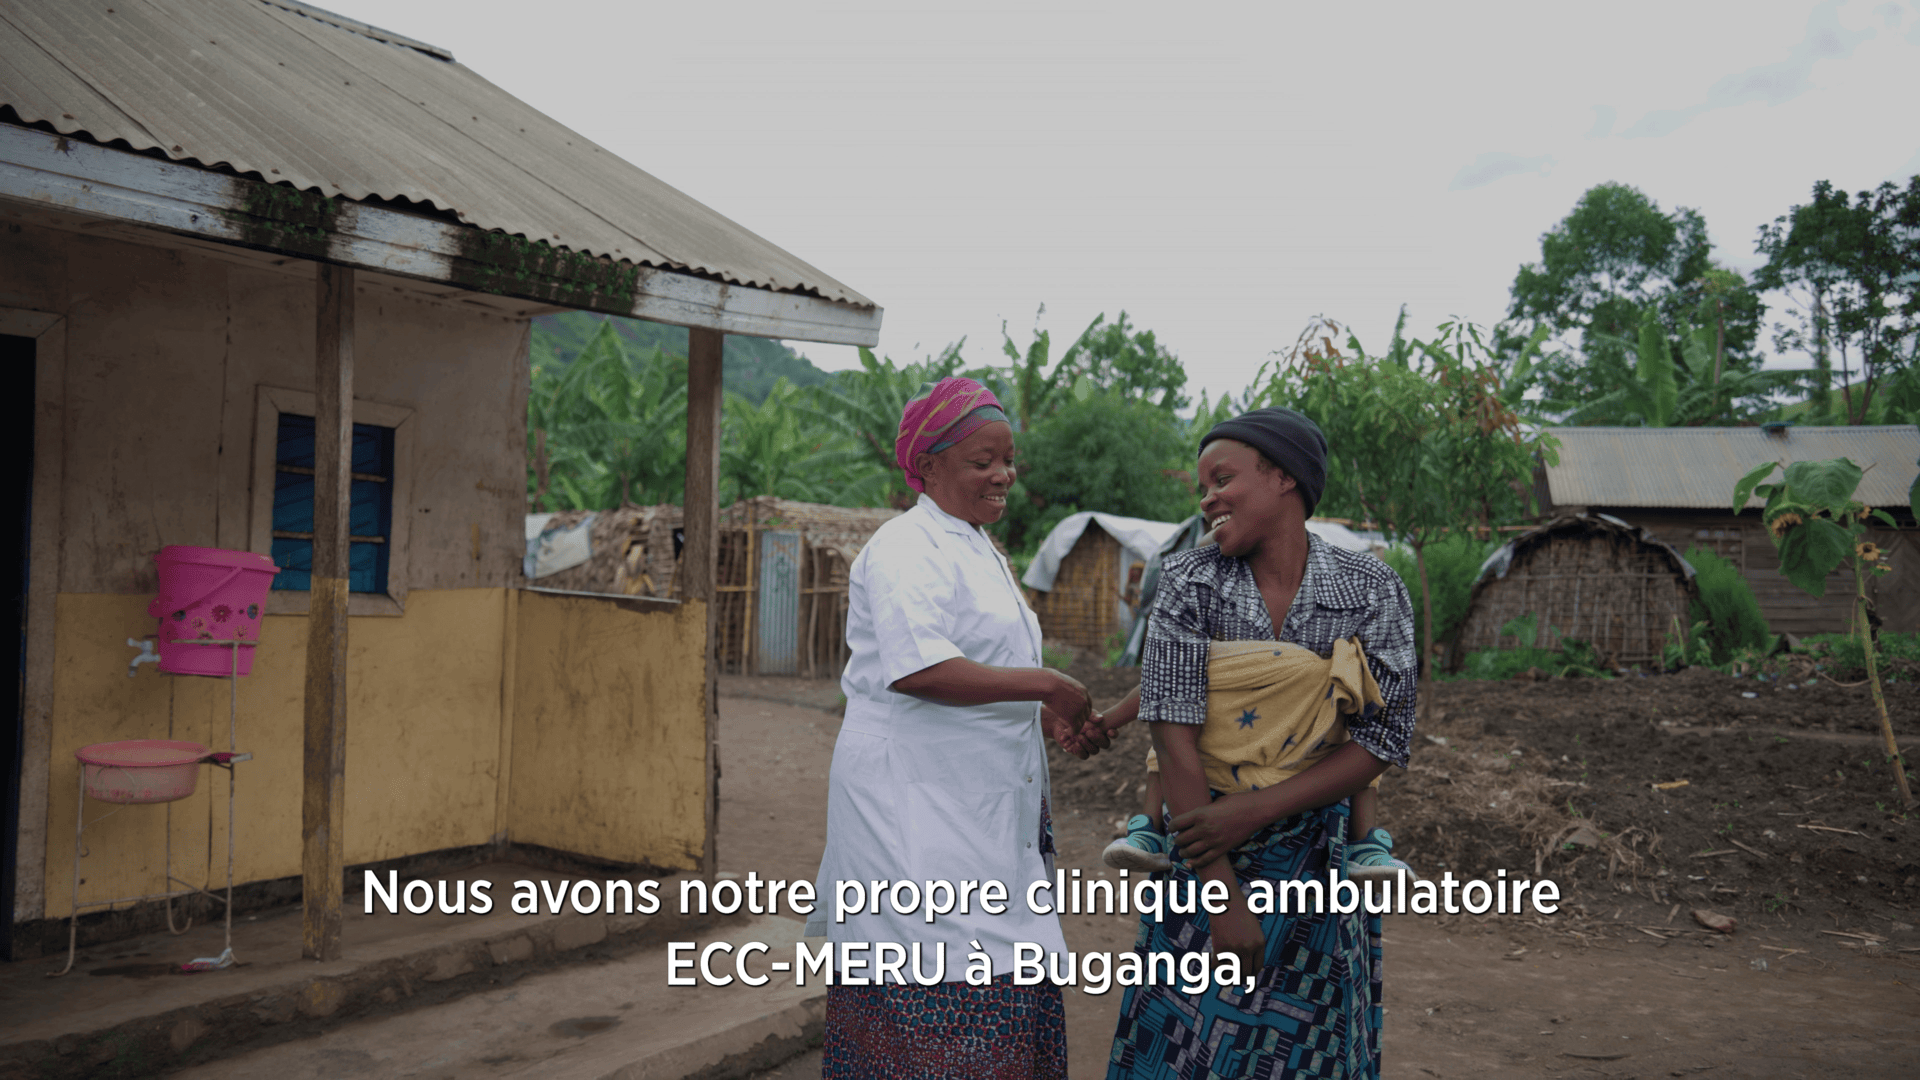 Humanitarian, Early Recovery and Development (HERD) Program in DRC